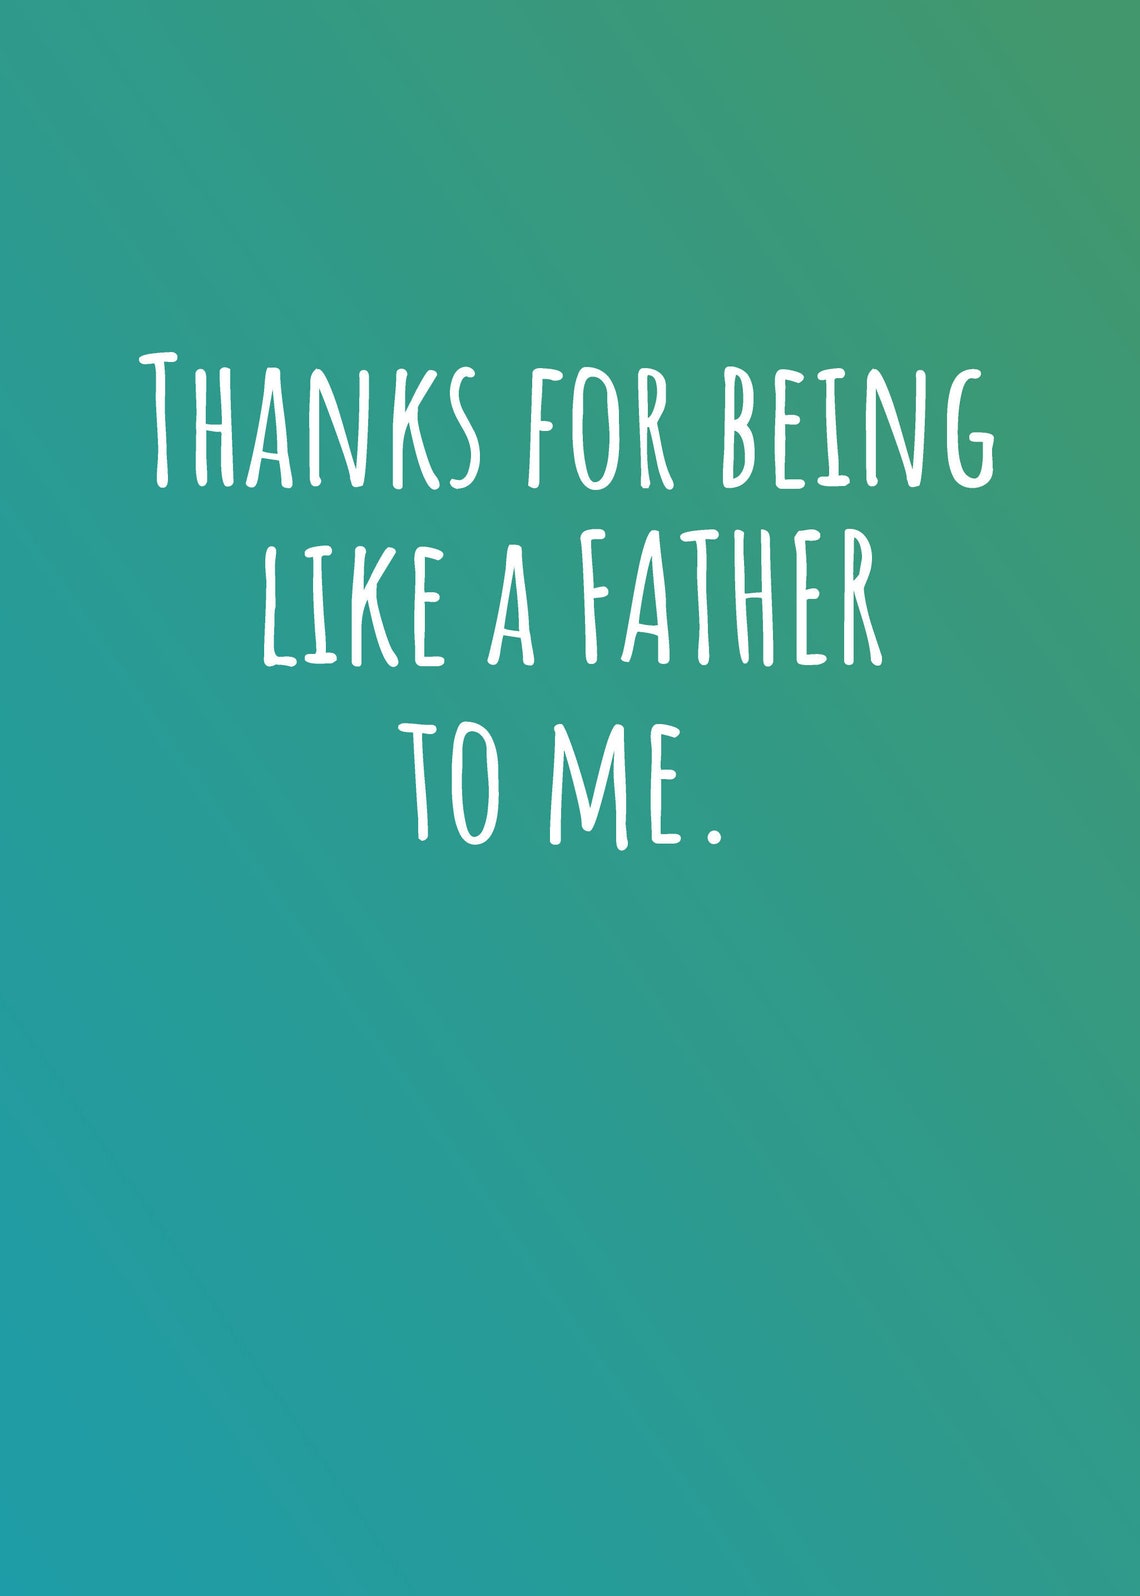 thanks-for-being-like-a-father-to-me-father-s-day-or-etsy